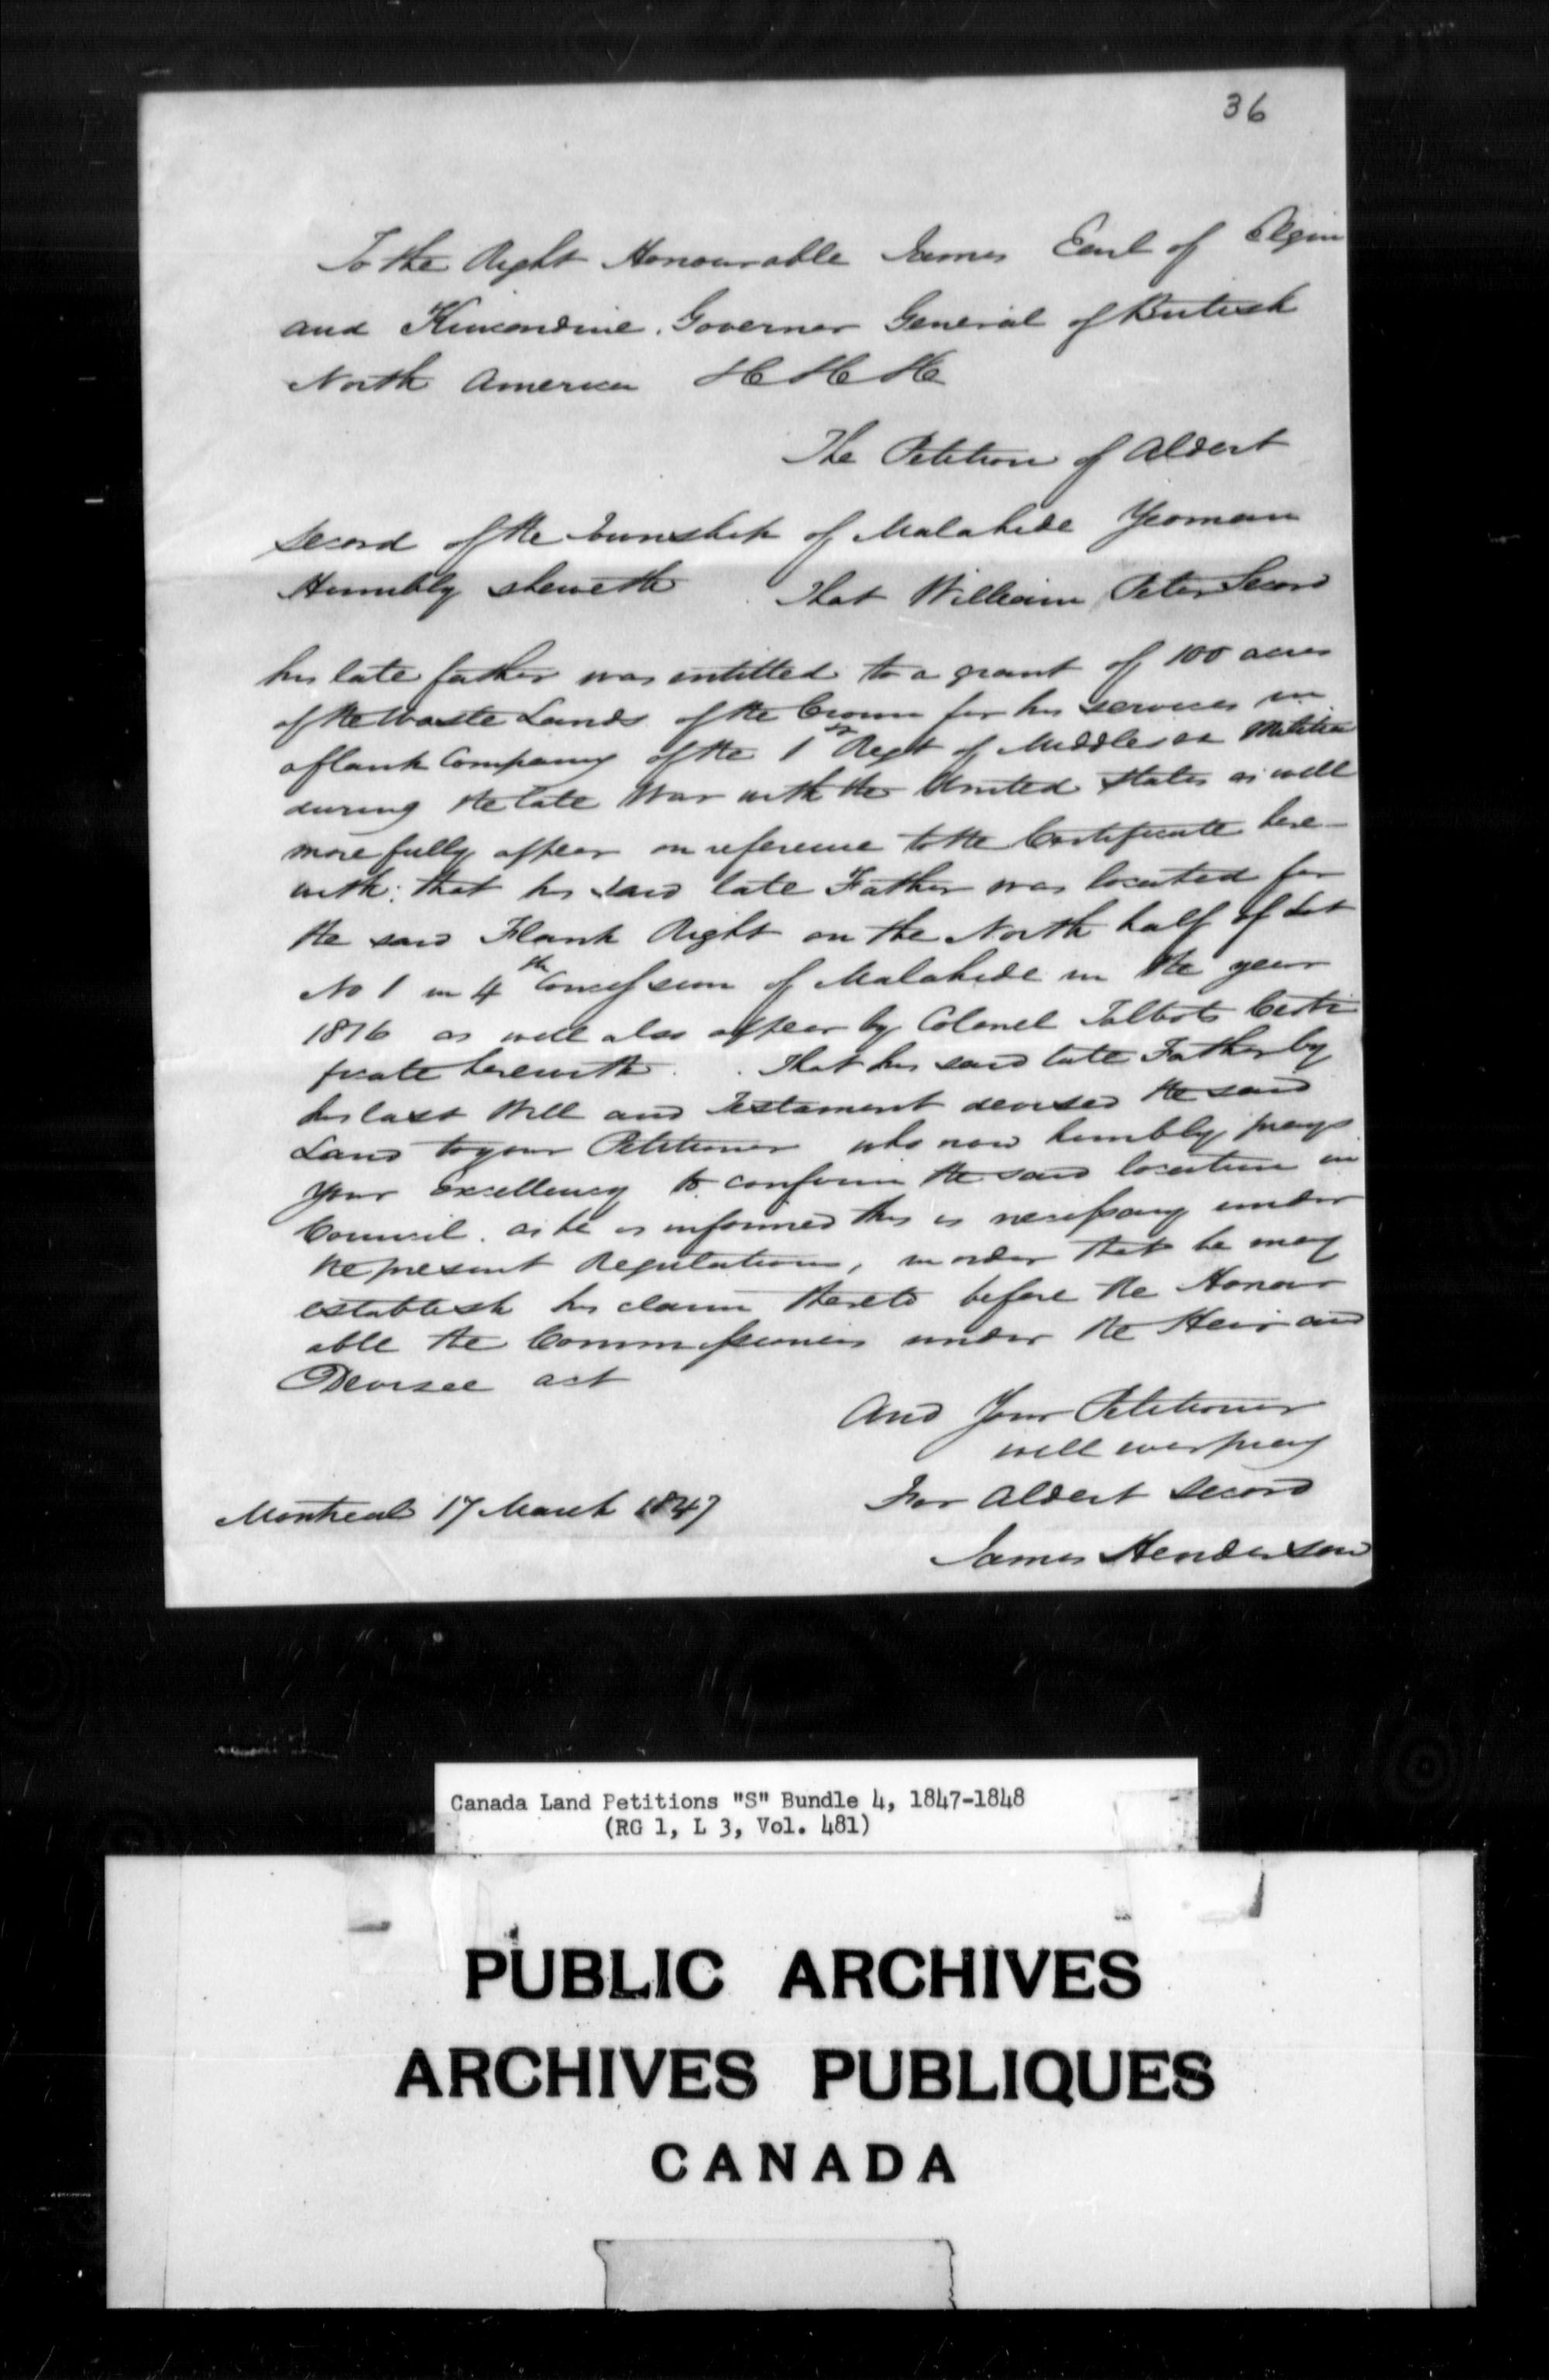 Title: Upper Canada Land Petitions (1763-1865) - Mikan Number: 205131 - Microform: c-2824